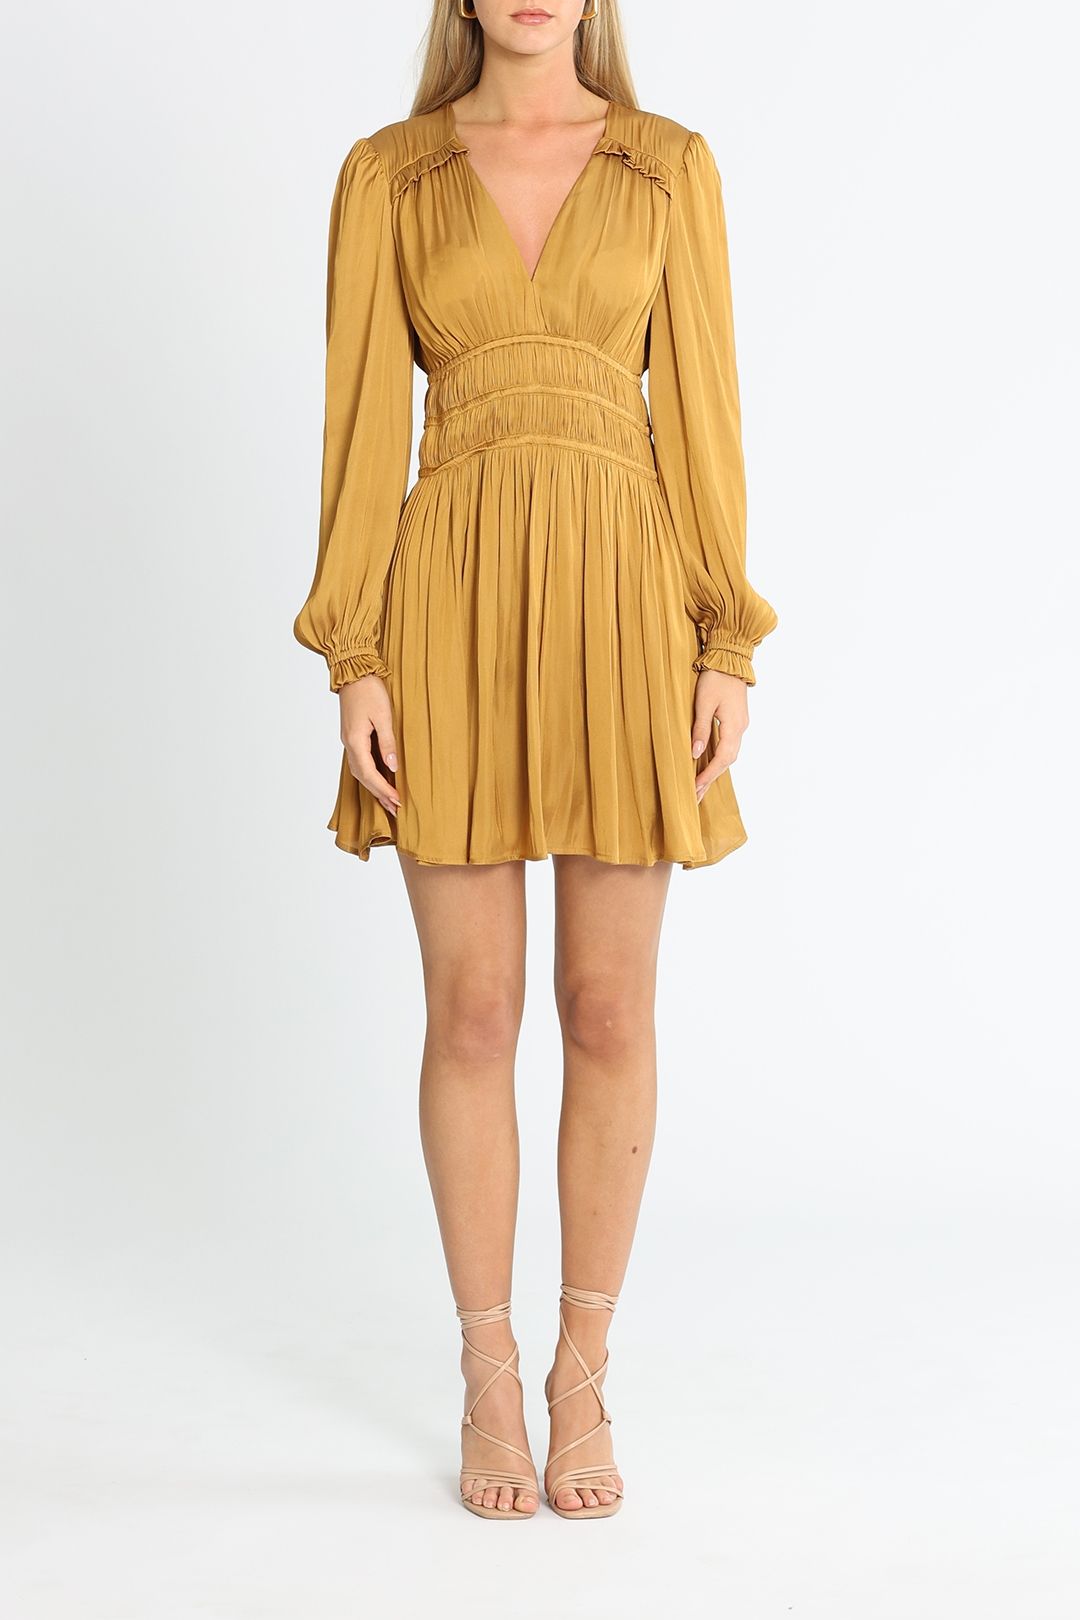 Belle and Bloom Shine Bright Ruched Dress Mustard